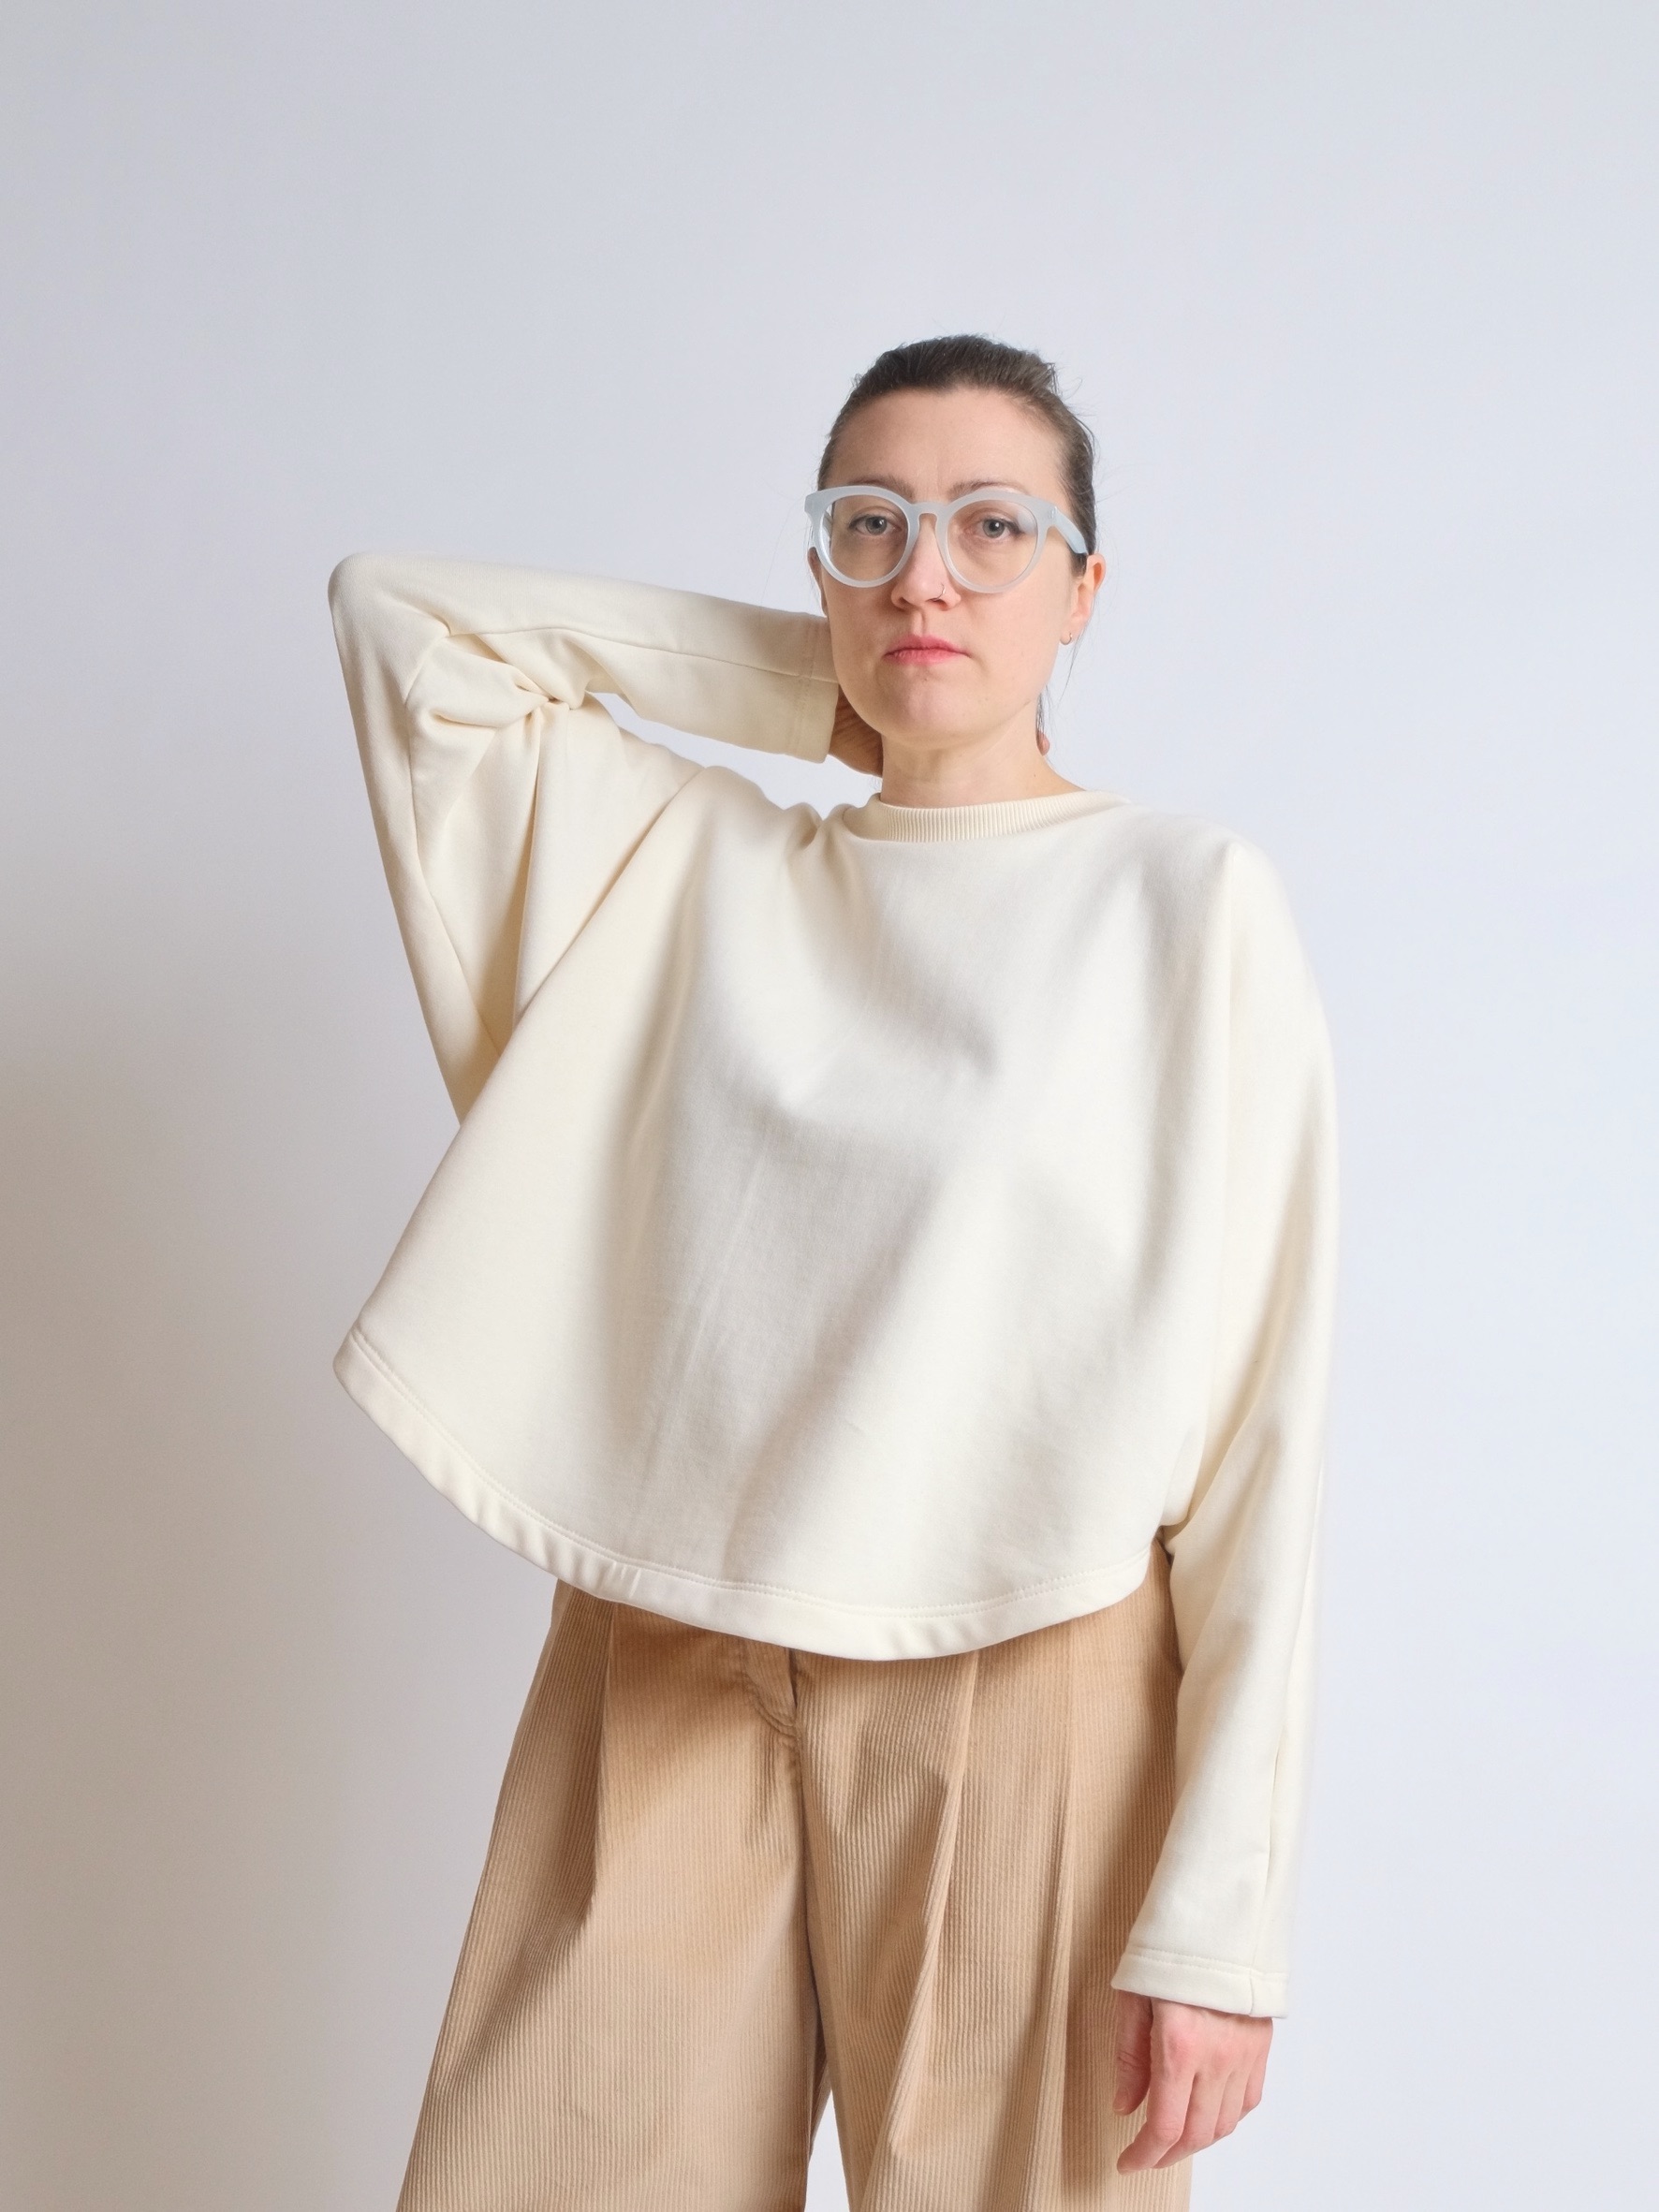 Woman wearing the ZW Jumper sewing pattern from Birgitta Helmersson on The Fold Line. A top pattern made in woven or knit fabrics, featuring an oversized fit, curved hem, full length slim sleeve, and crew neck with ribbed neck band.